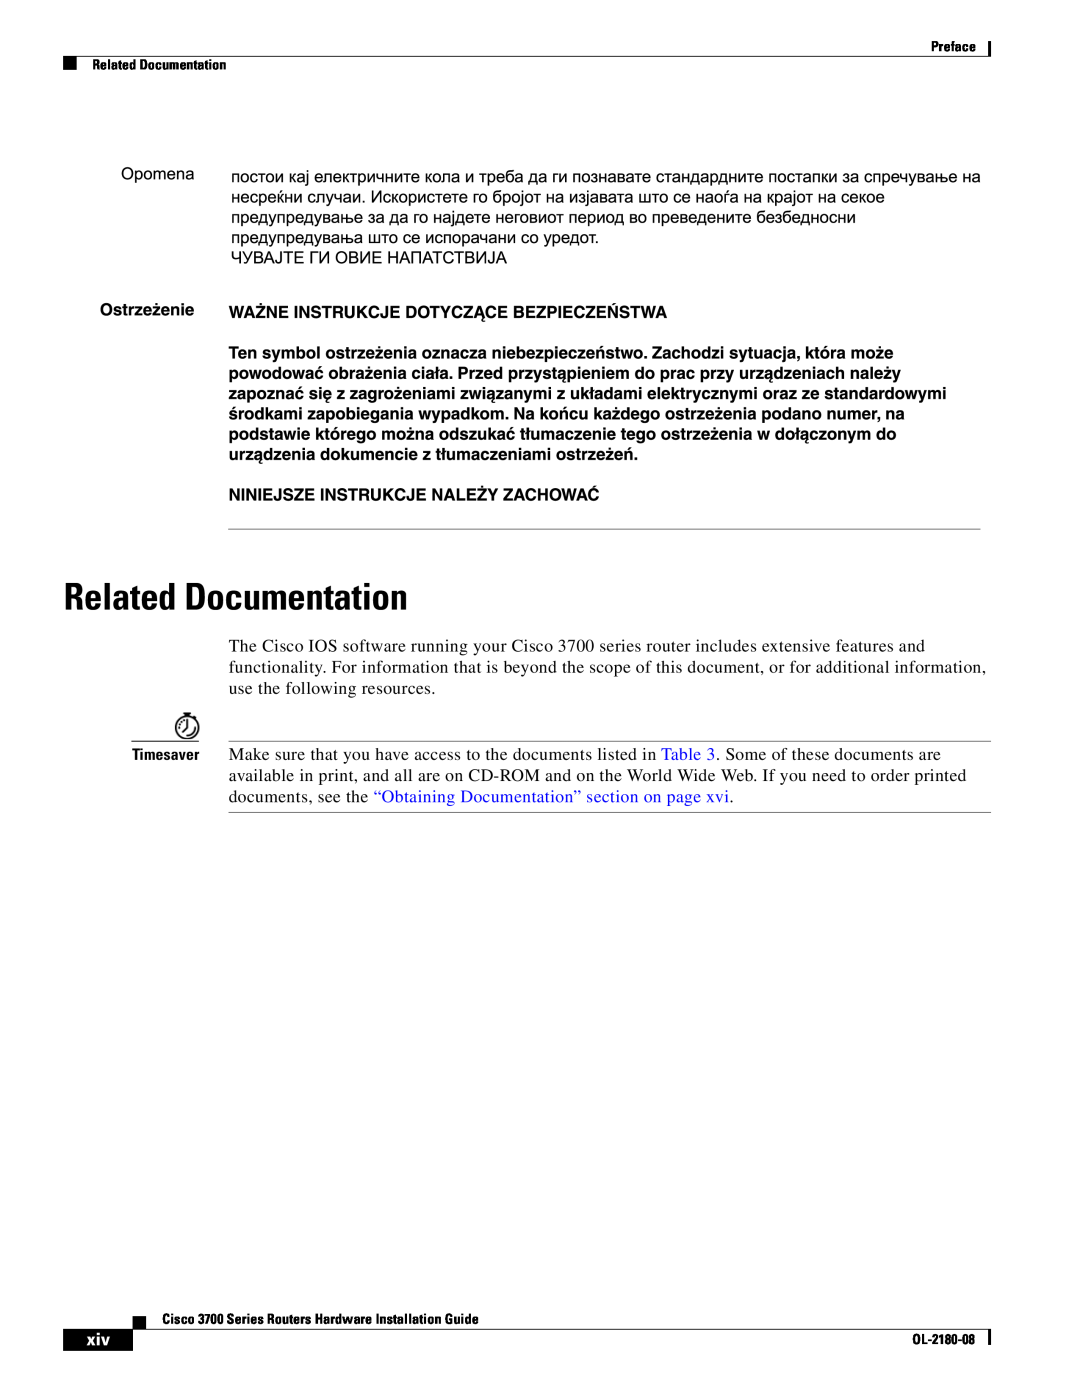 Cisco Systems 3700 Series manual Related Documentation 